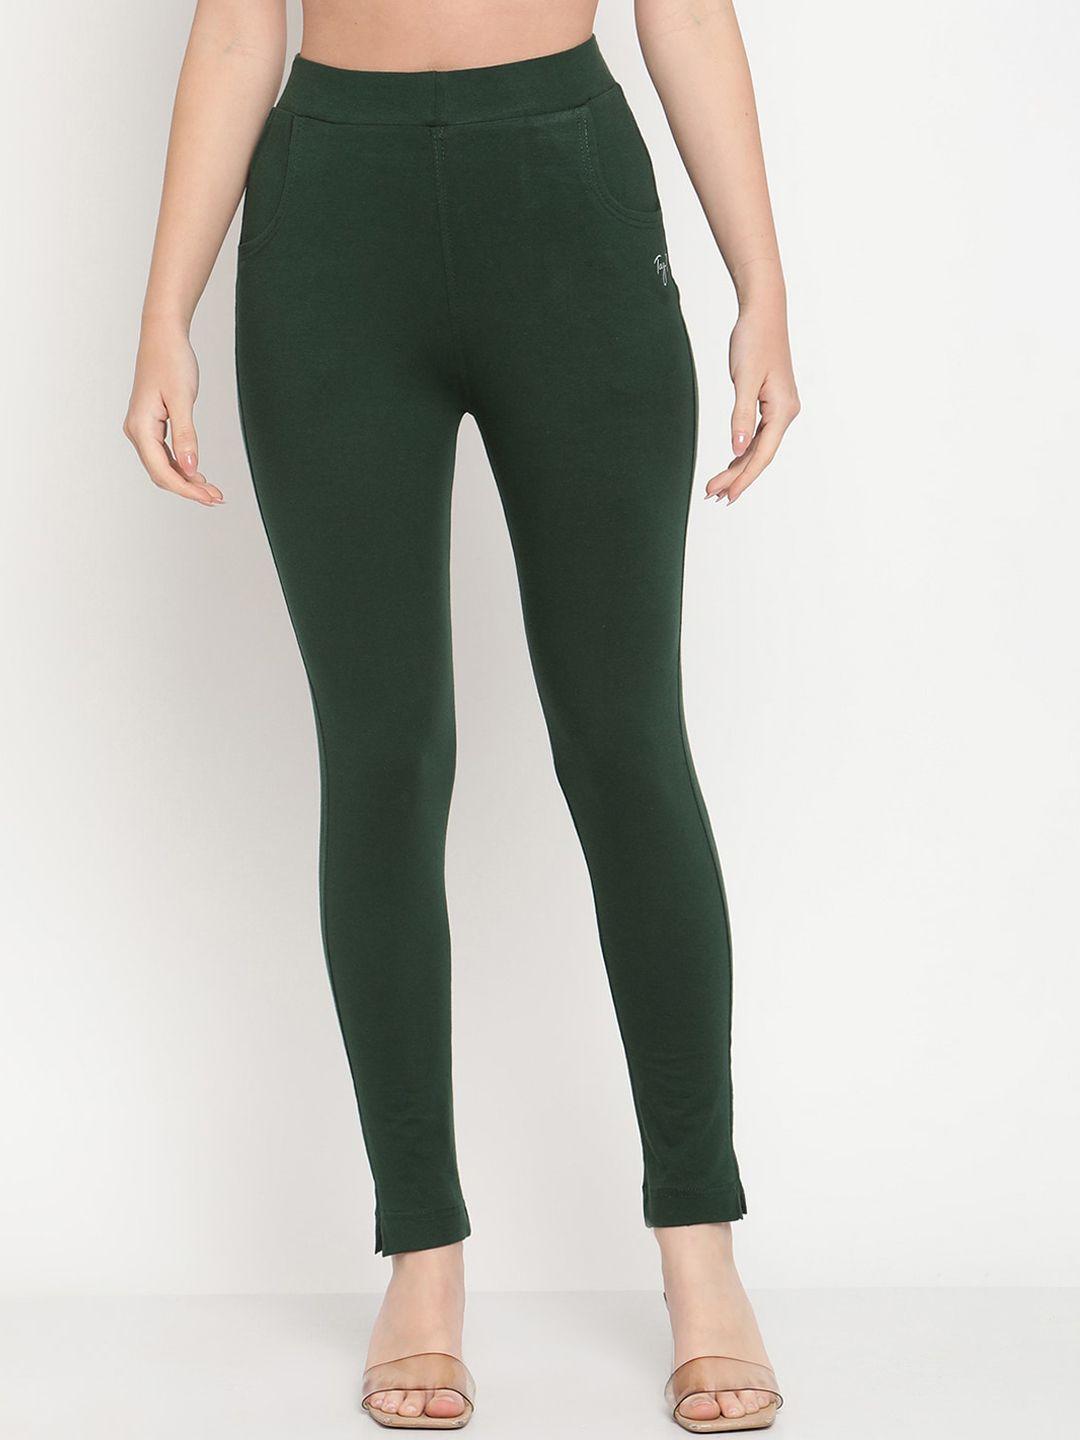 tag 7 women green solid ankle length leggings